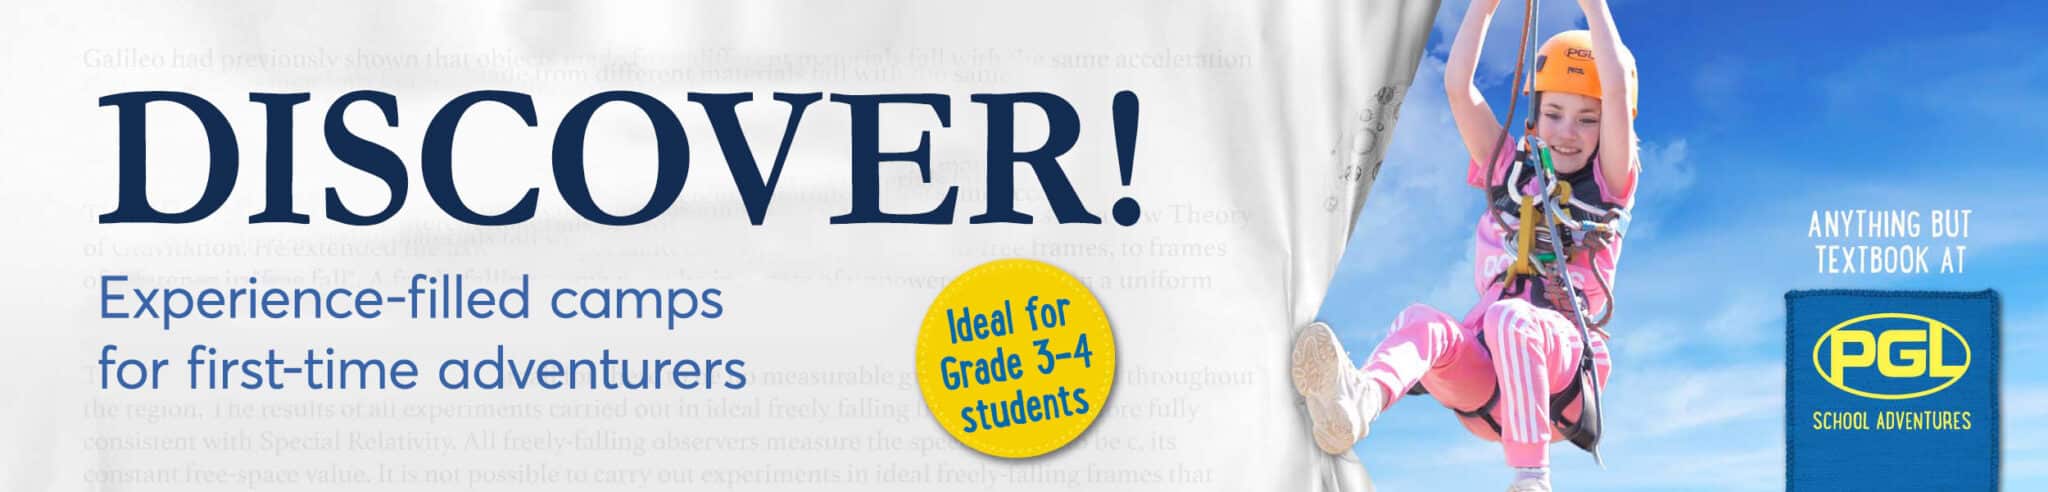 Banner featuring a joyful girl on a zip line, with text "Discover! Adventure-filled comps for first-time adventurers, ideal for grade 3+ students" and the PGL logo.